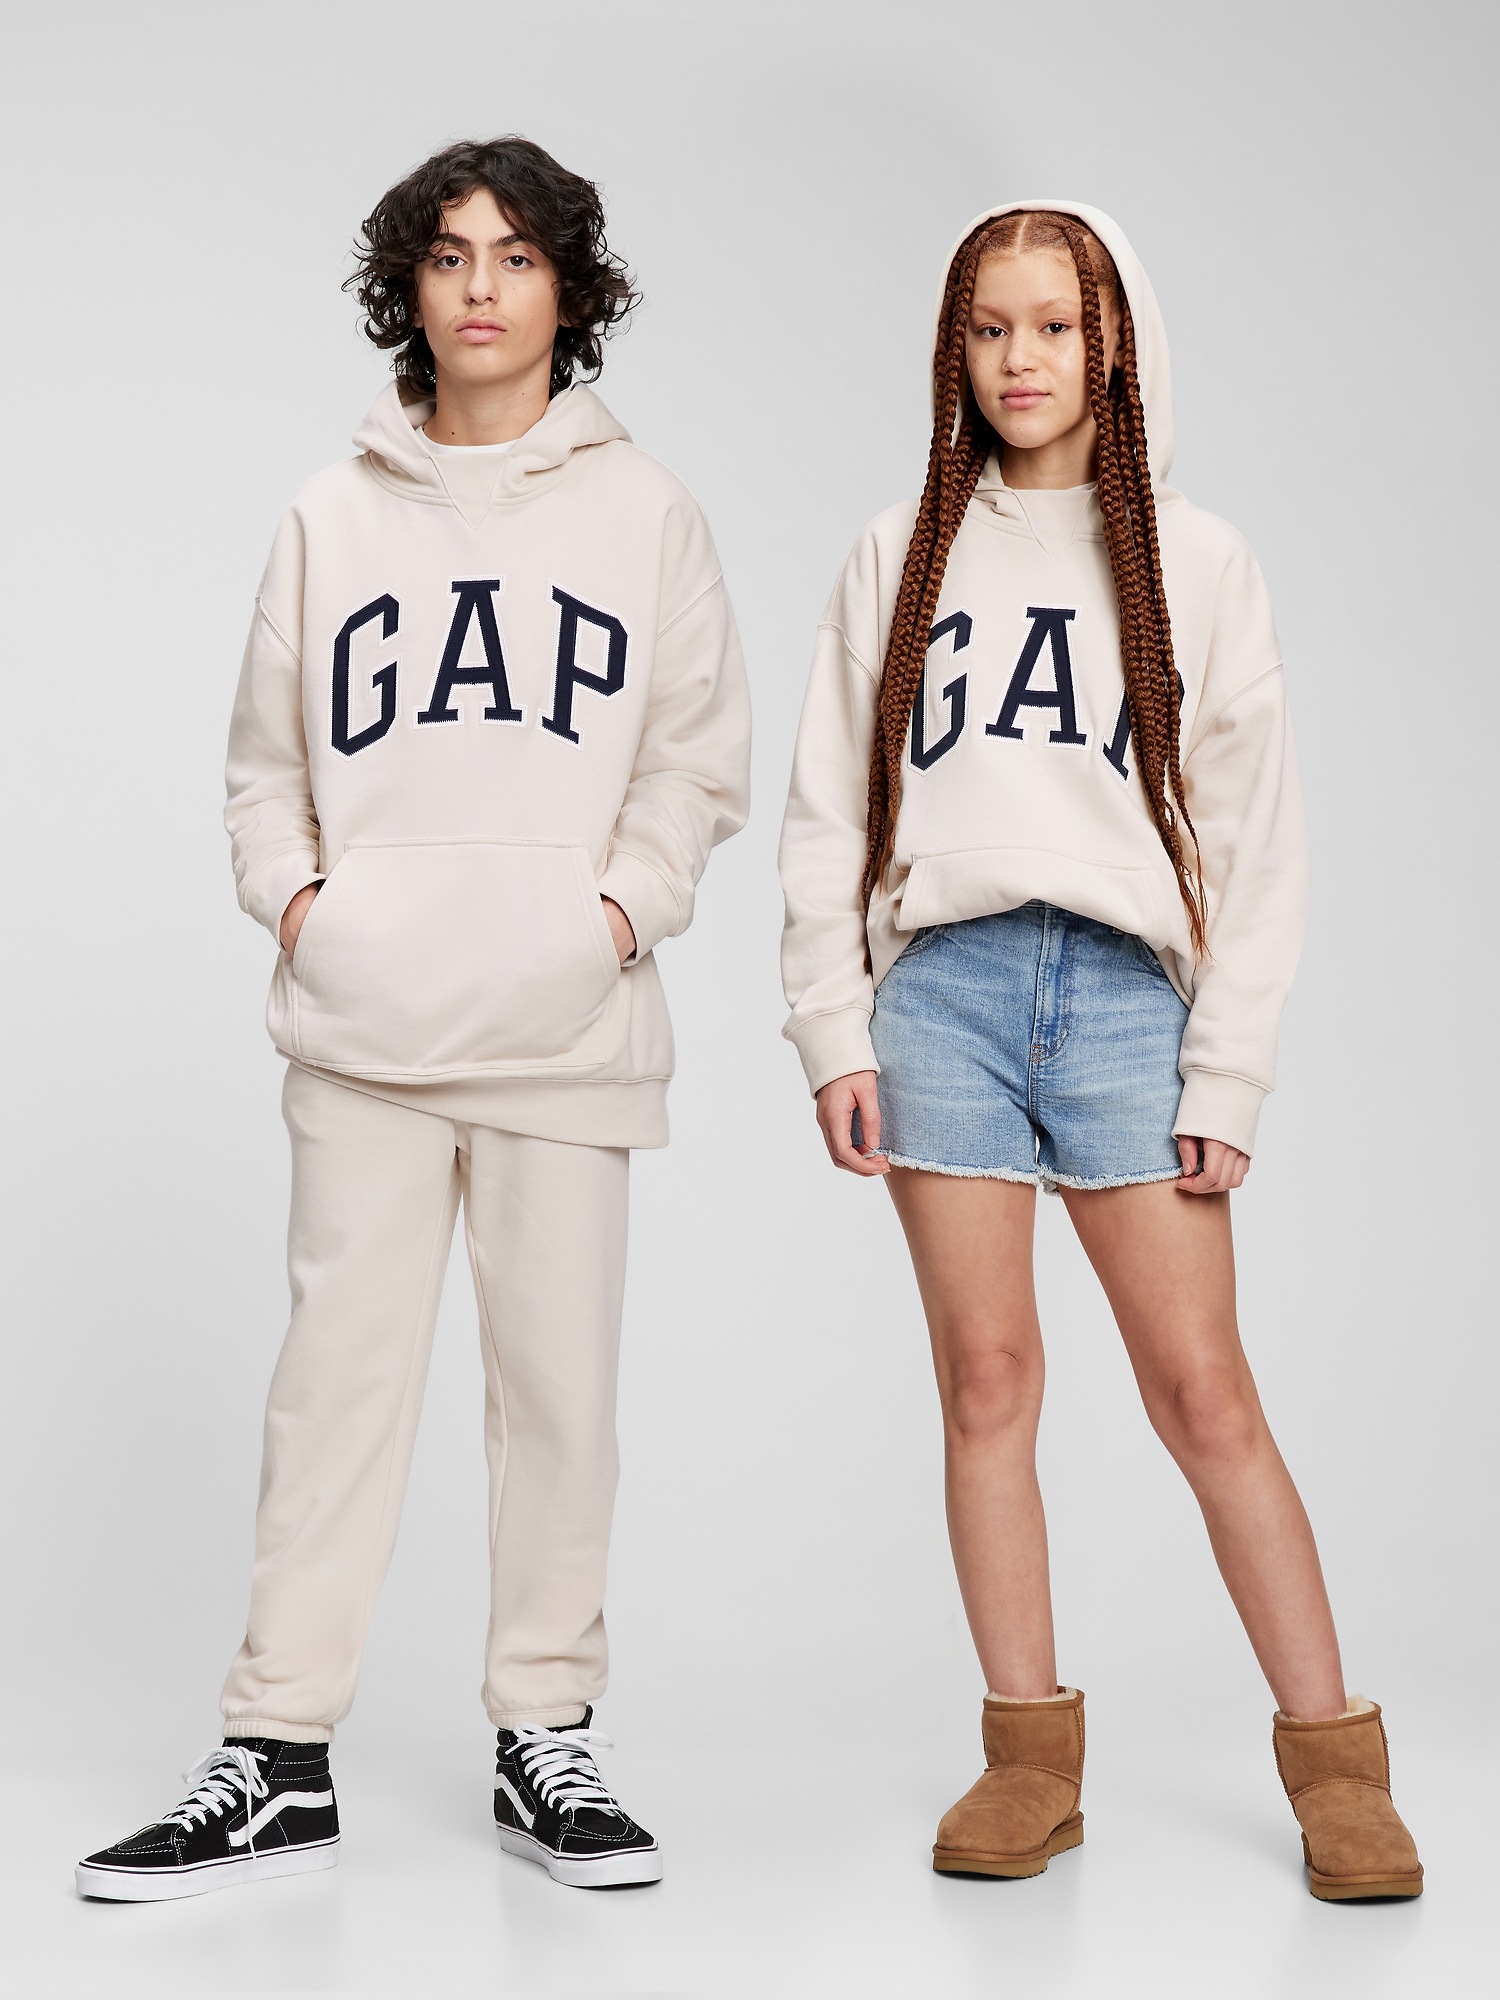 The classic Gap hoodie of your youth is now worth hundreds of dollars